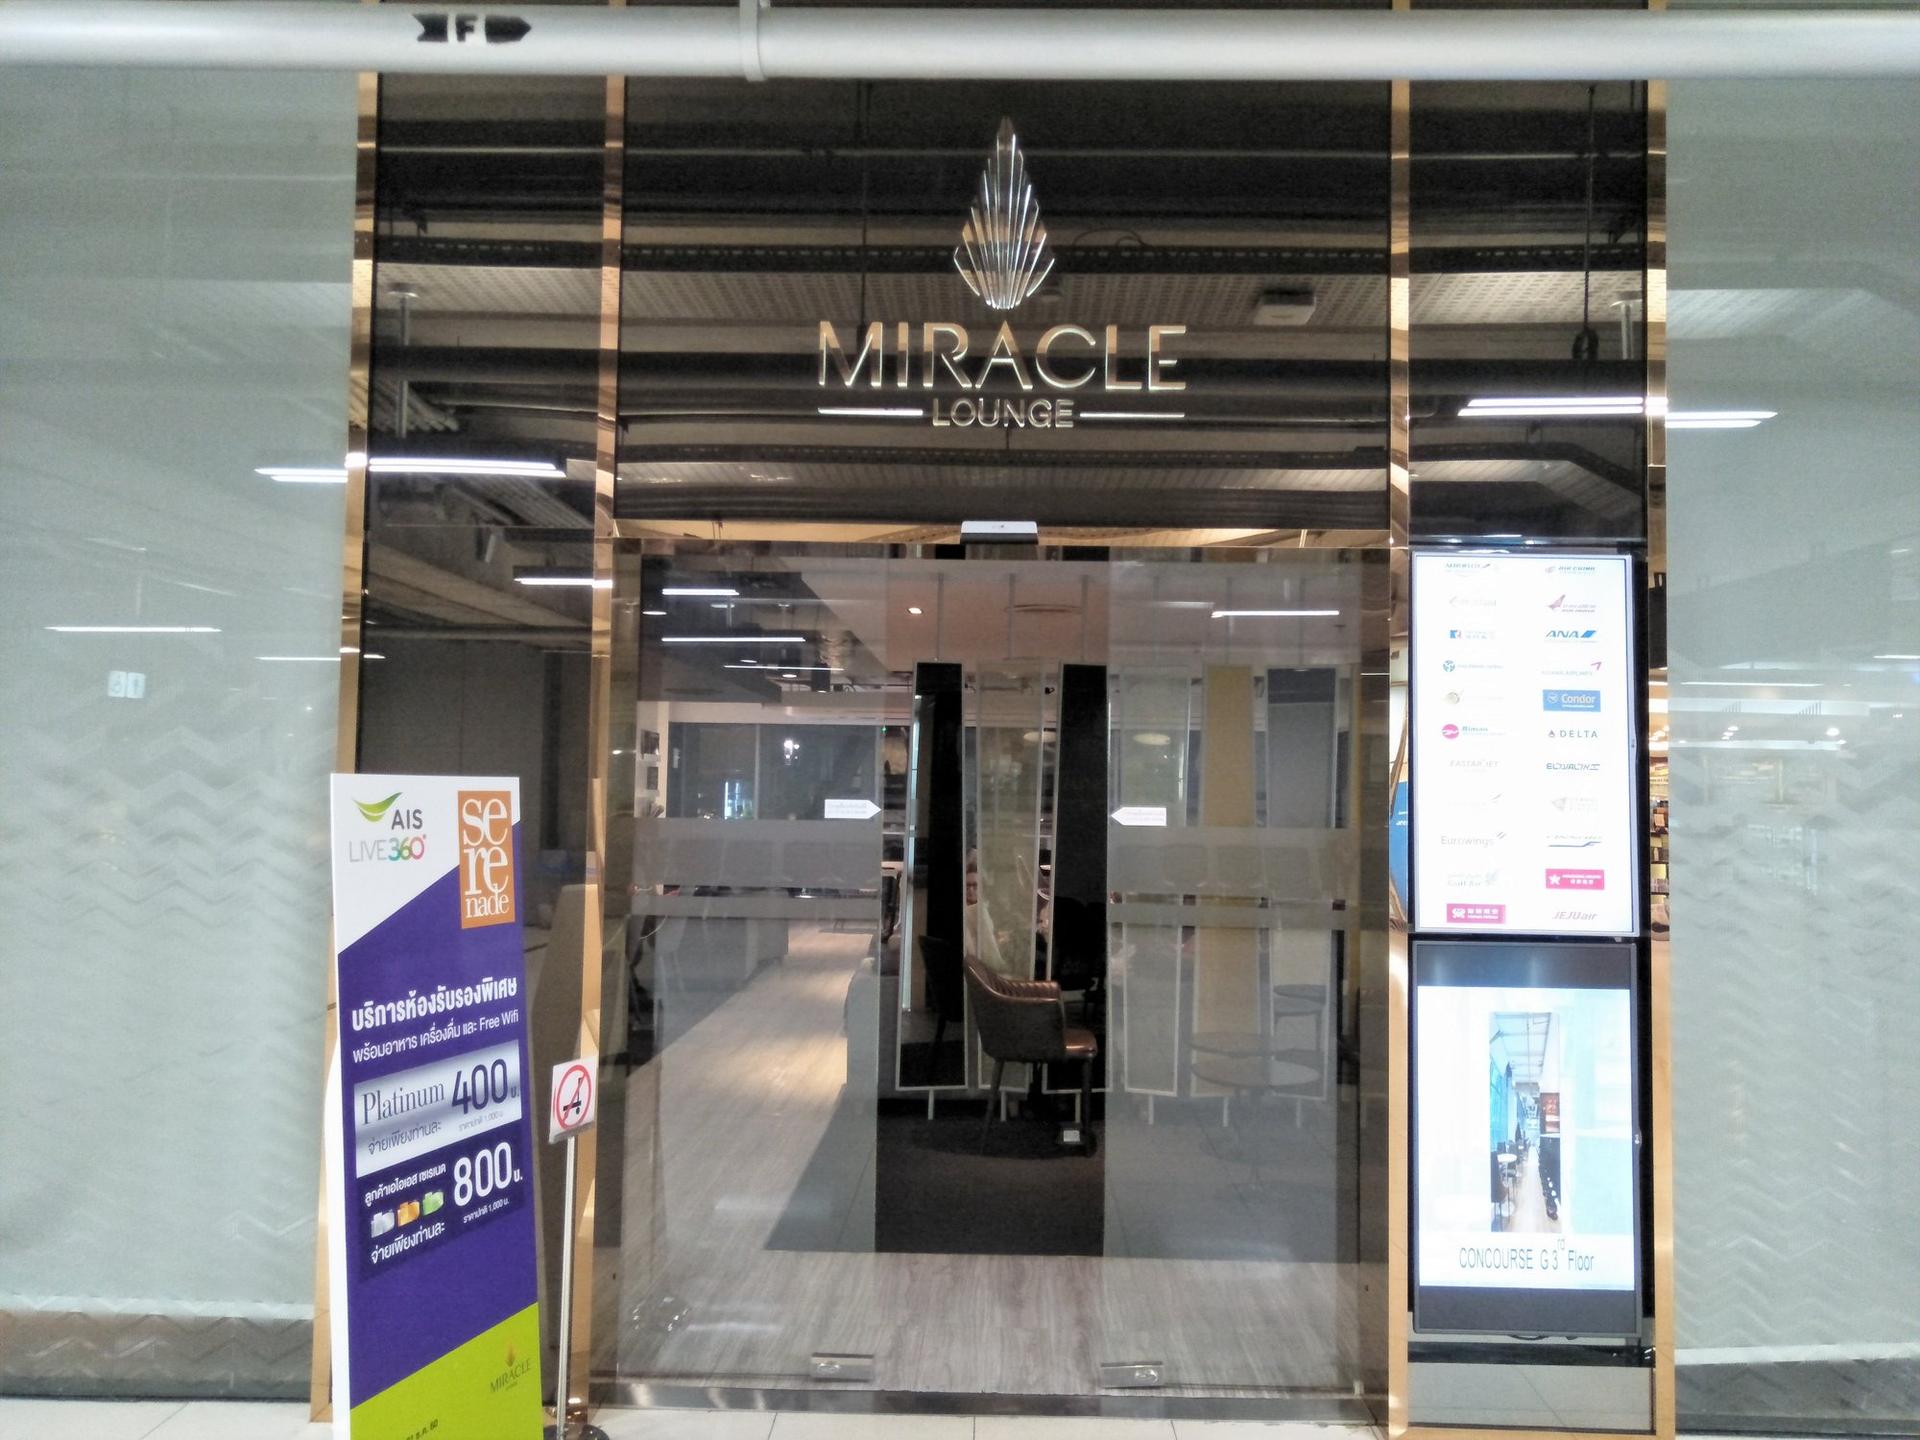 Miracle First Class Lounge image 22 of 34